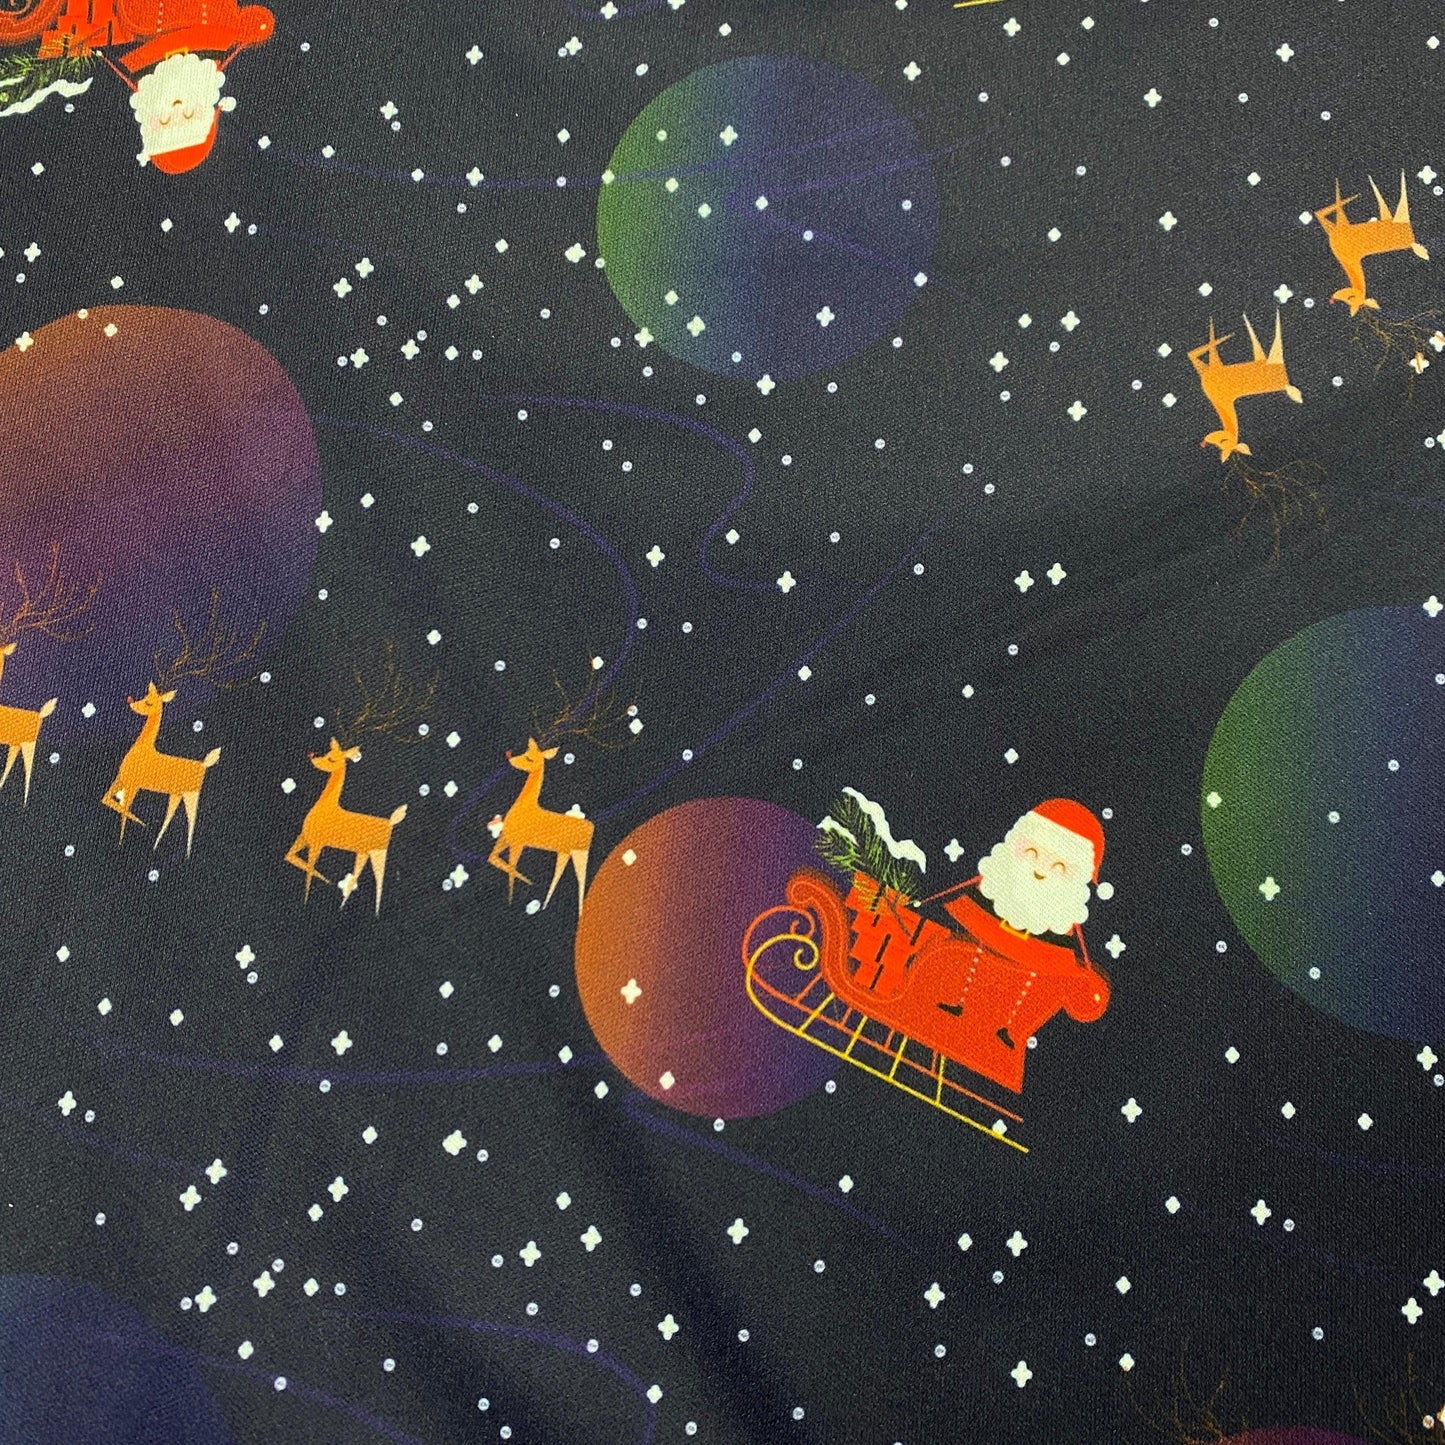 Santa Over the Moon 1 mil PUL Fabric - Made in the USA - Nature's Fabrics